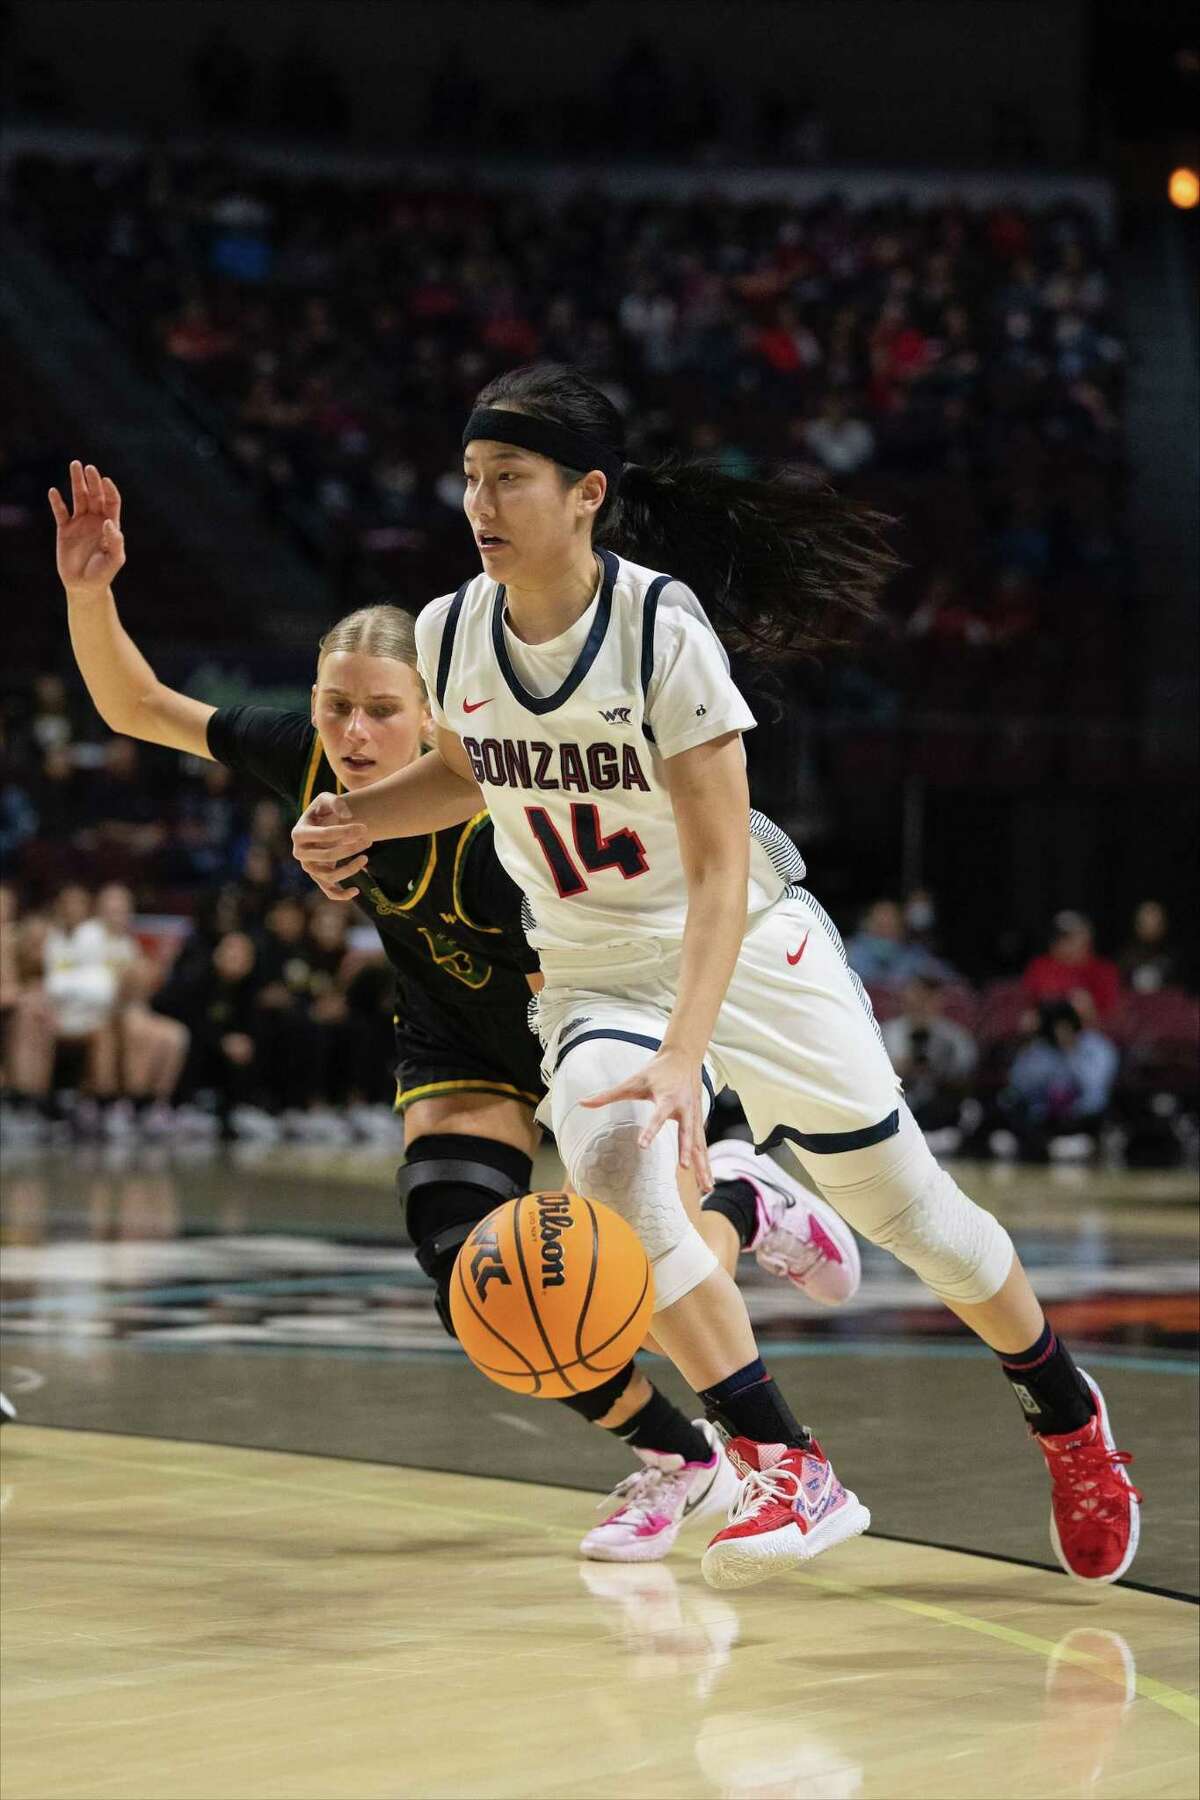 Kaylynne Truong led Gonzaga with 16 points against USF in a WCC semifinal Monday in Las Vegas.